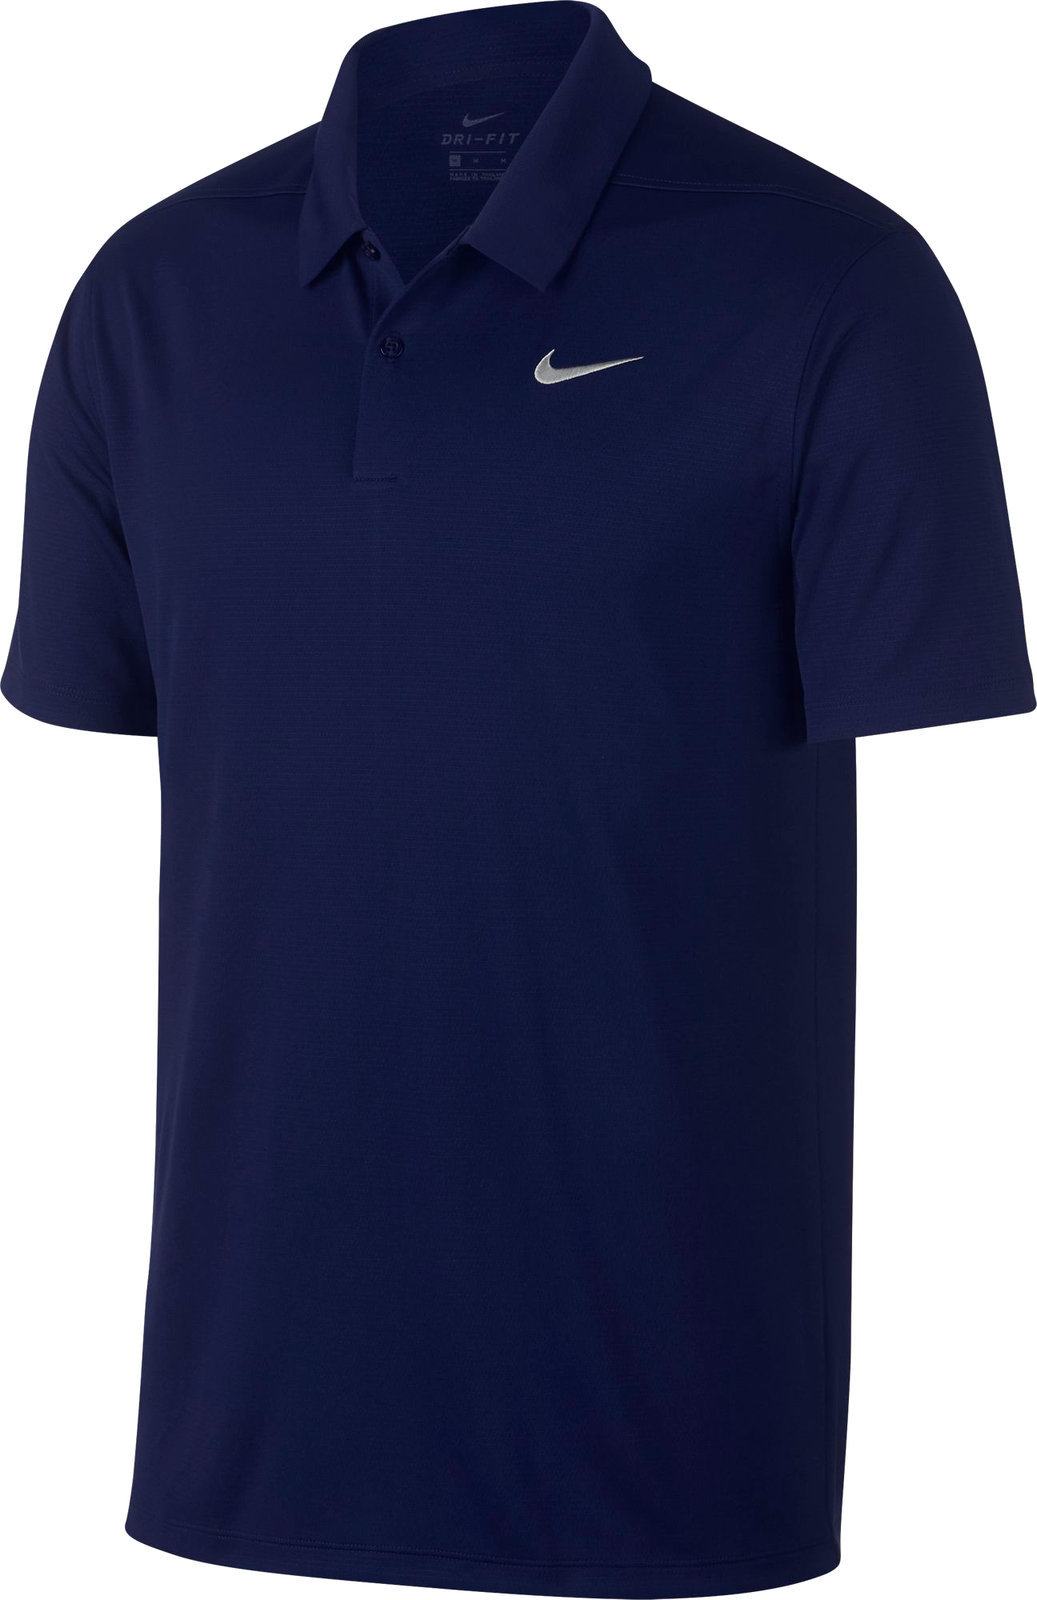 Риза за поло Nike Dry Essential Solid Blue Void/Flat Silver L